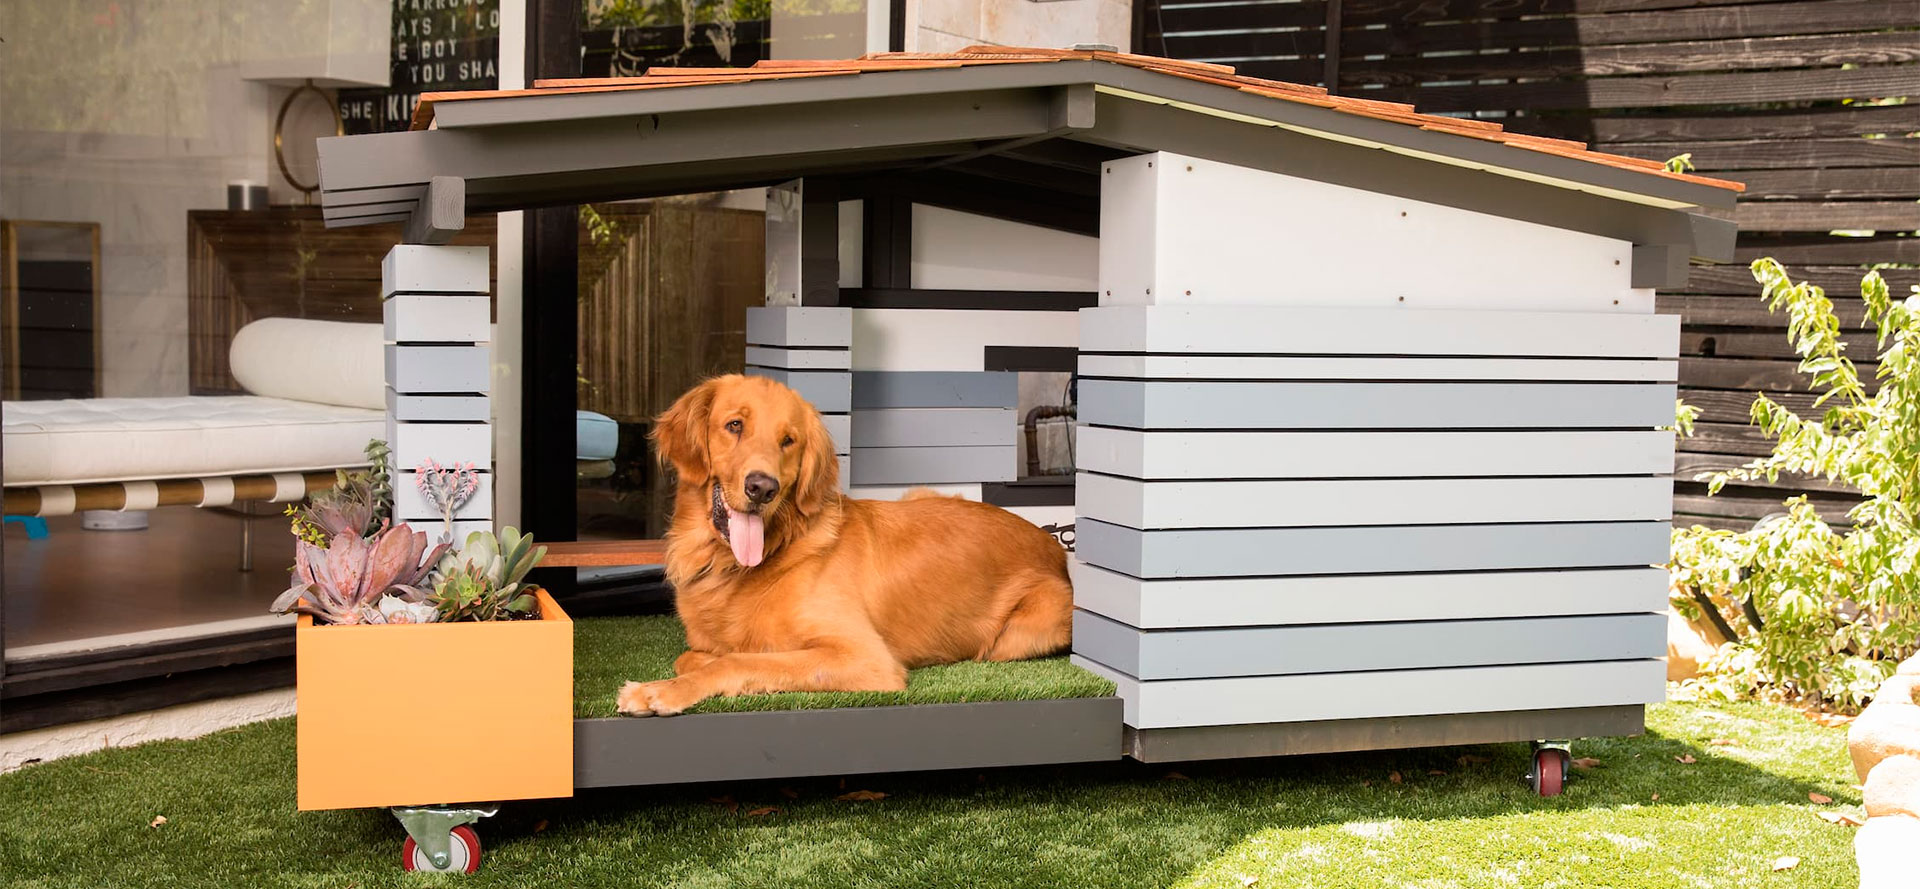 Large breed dog in dog house.